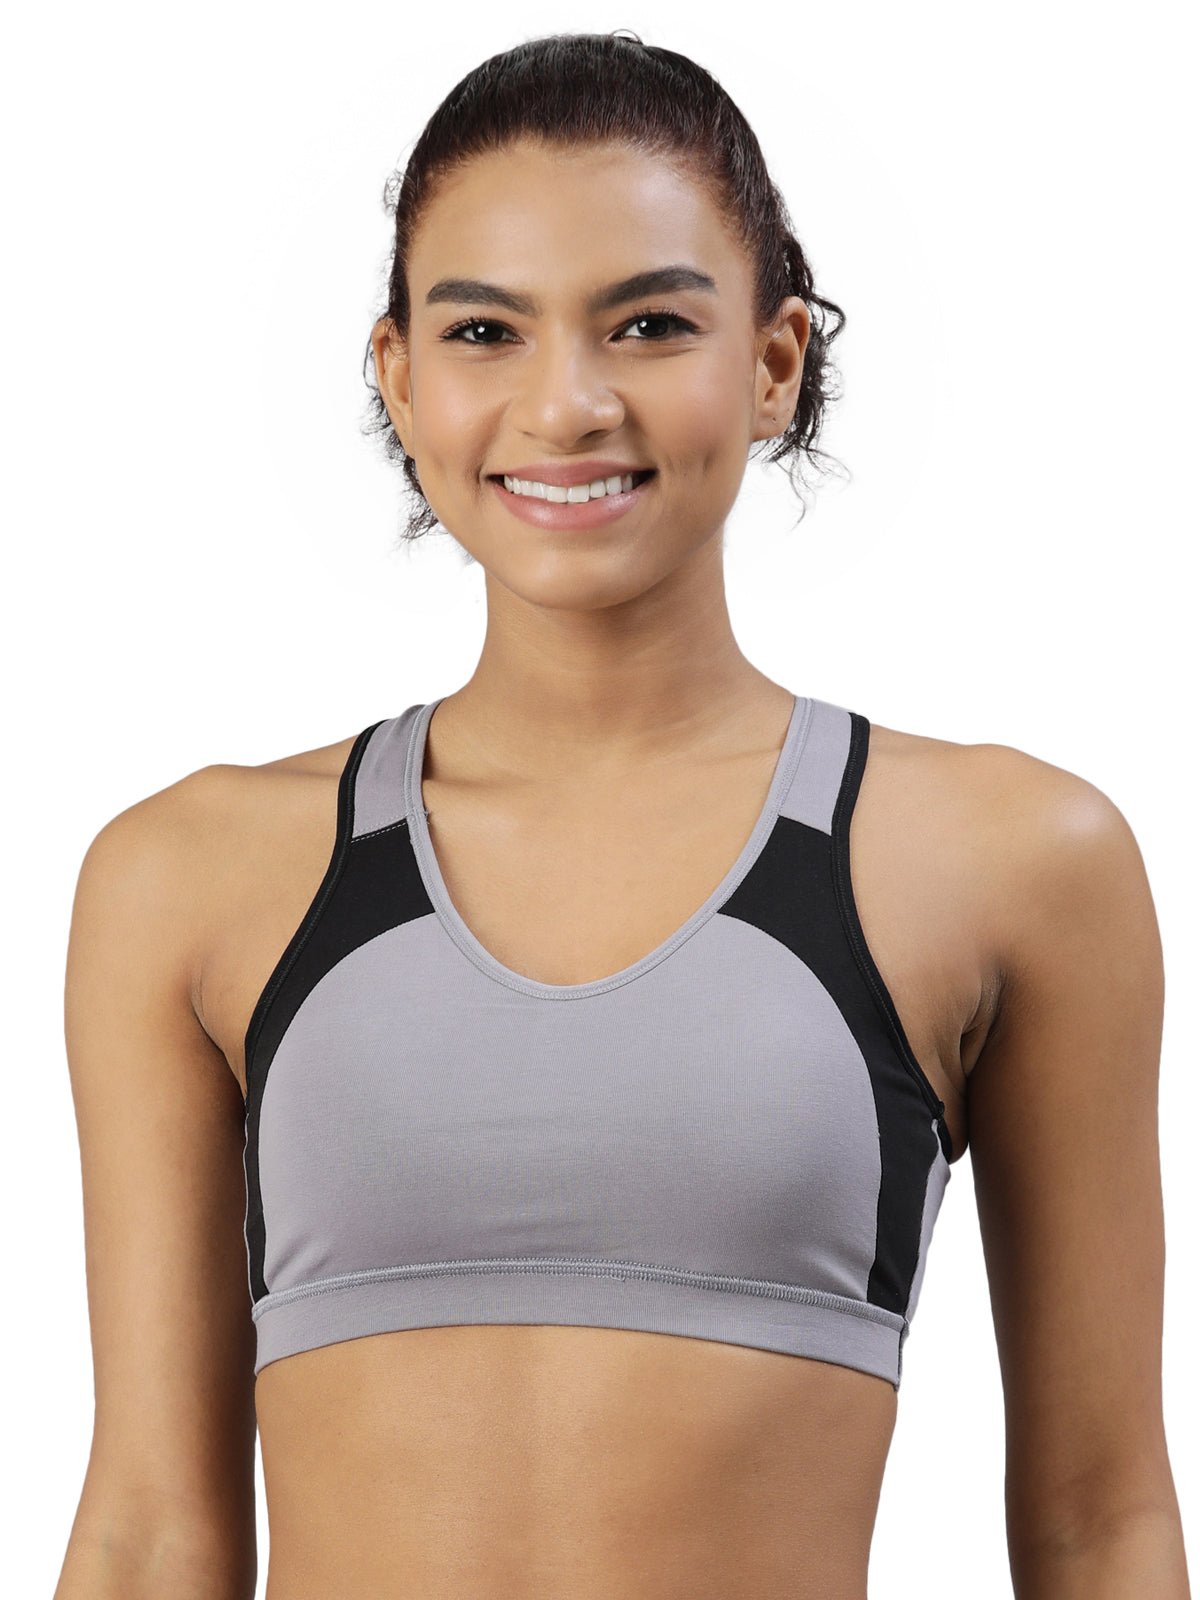 blossom-workout bra-silver grey1-Sports collection-utility based bra